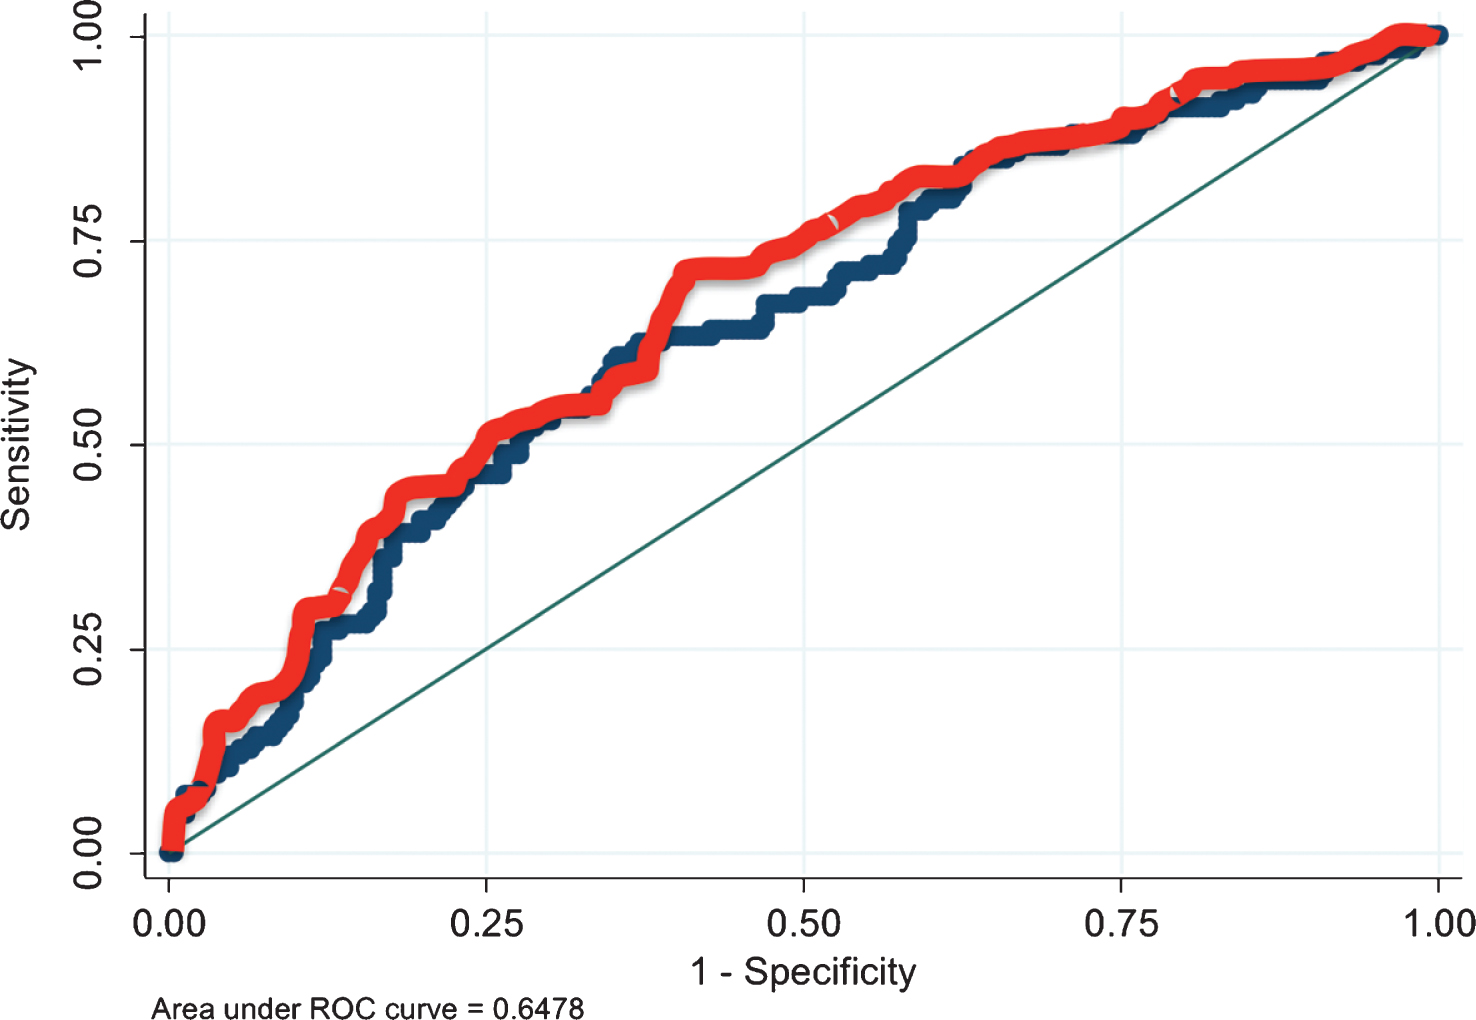 
          ROC curves of models to predict pathological fat invasion at radical cystectomy. Blue line depicts the ROC curve for the regression model which dose not include EUA and the red line depicts the ROC curve for the model which includes EUA. AUC improves significantly from 0.648 to 0.676 with inclusion of EUA in the model (p = 0.004).
        